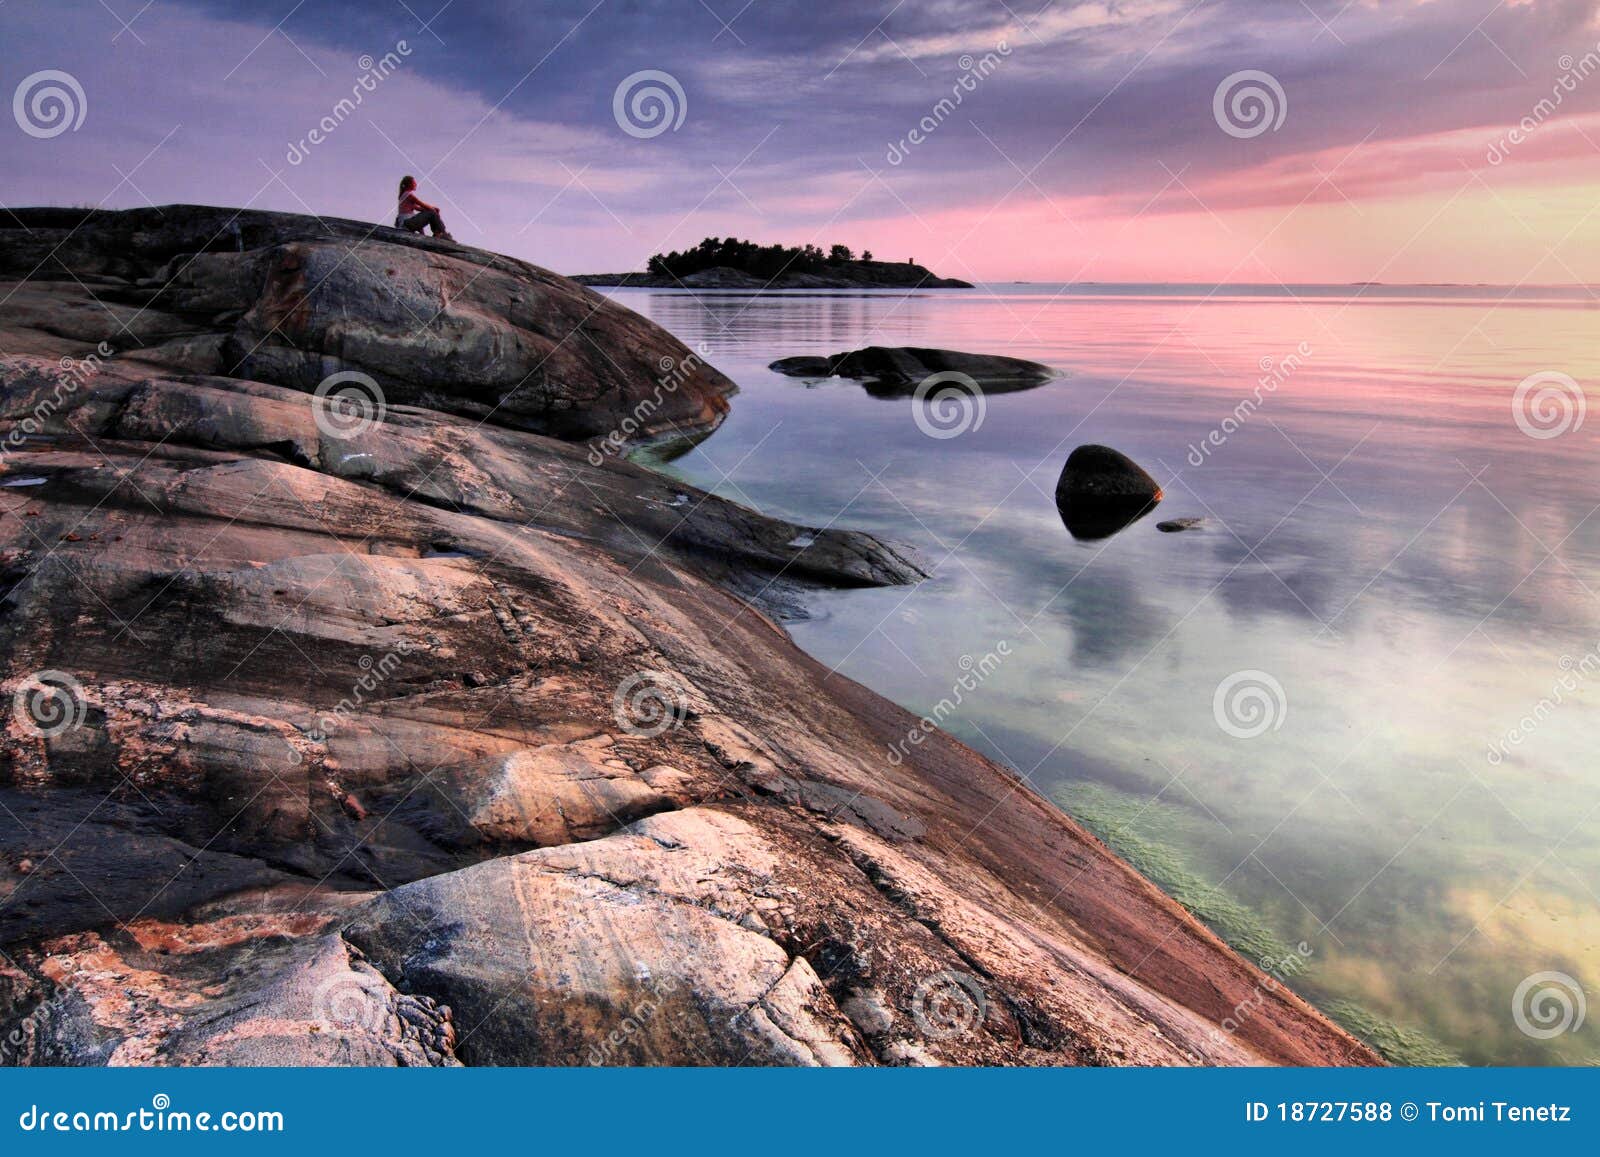 finland: sunset by the baltic sea